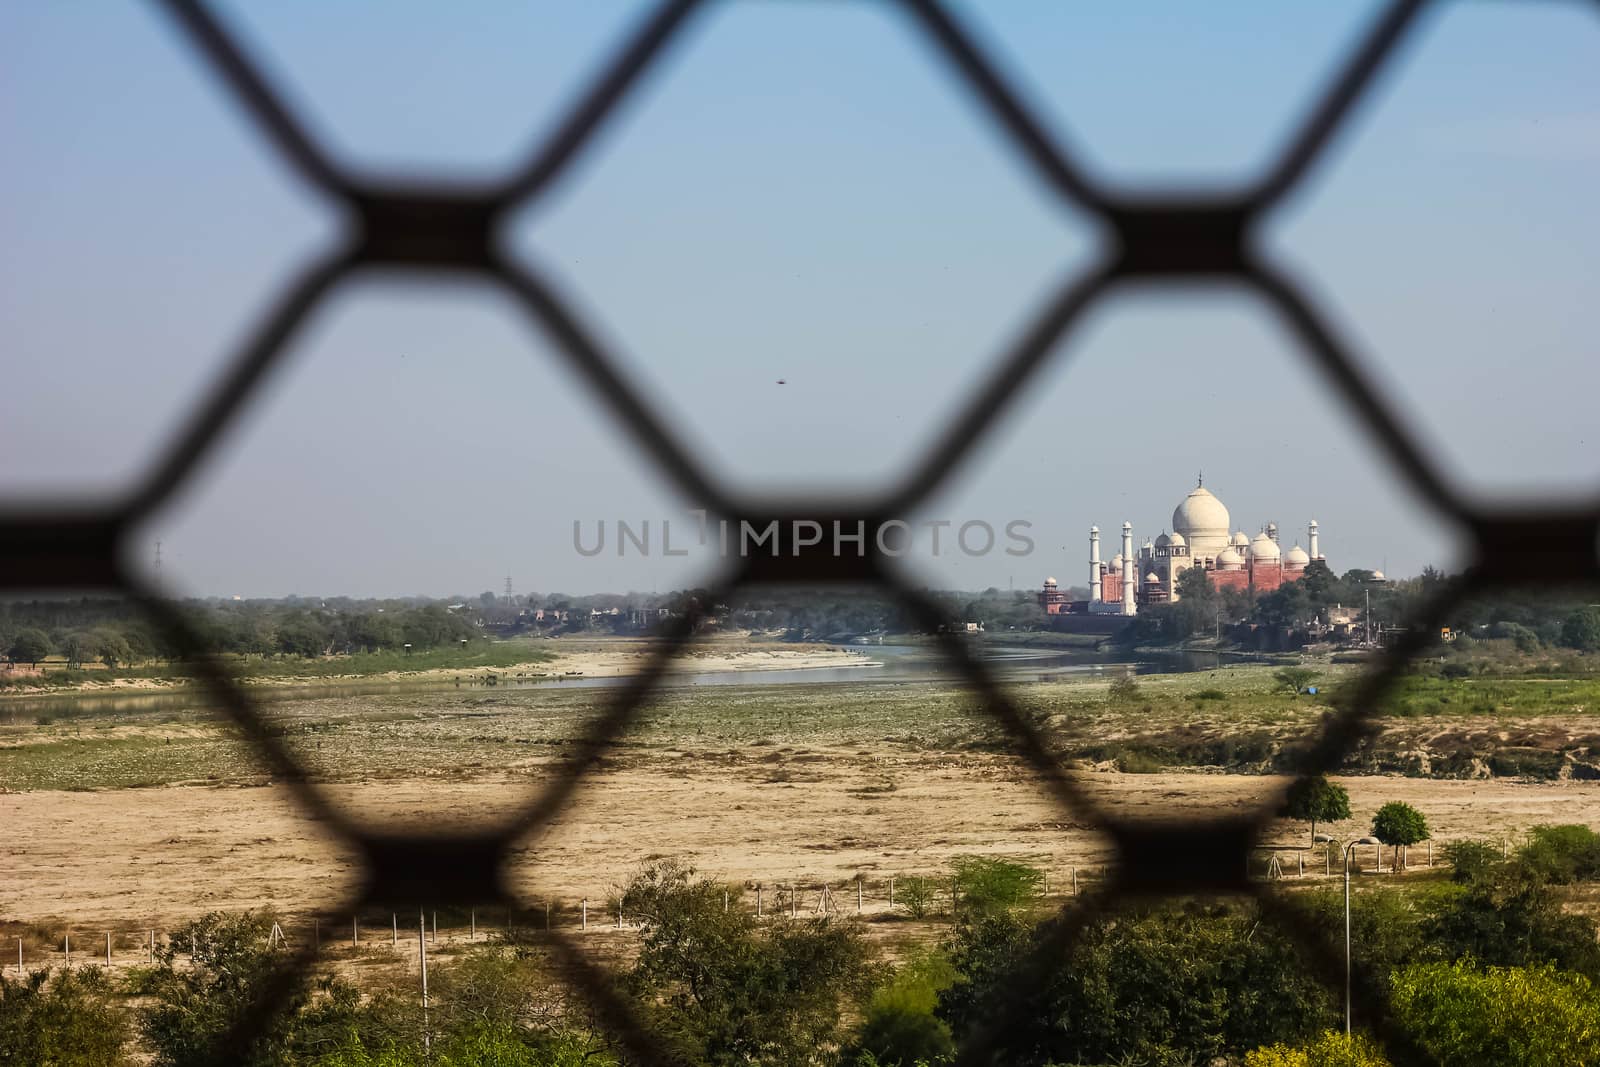 View of Taj Mahal from lattice jali in Agra, Uttar Pradesh, India. It was build in 1632 by Emperor Shah Jahan as a memorial for his second wife Mumtaz Mahal